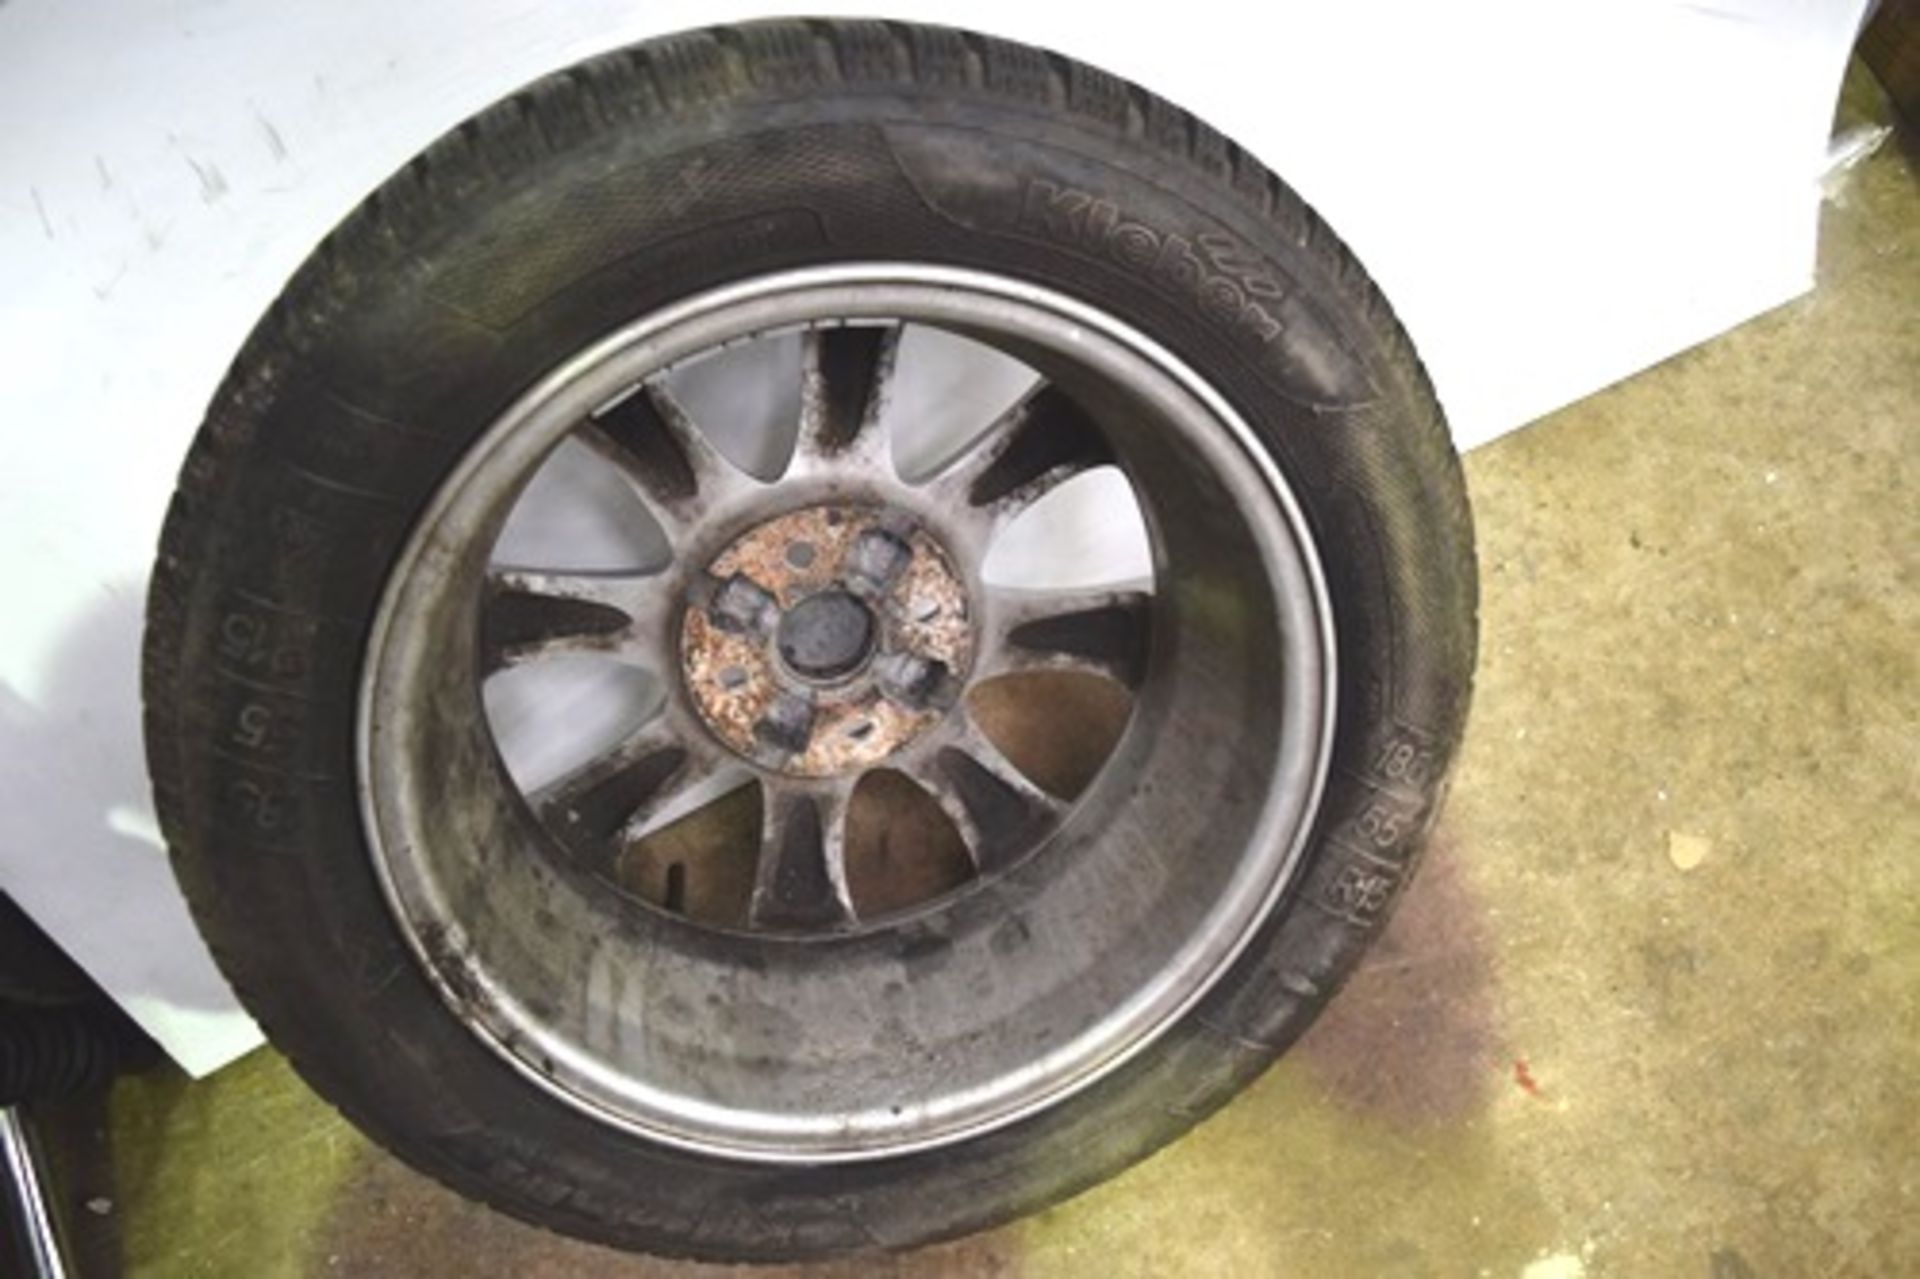 1 x Mazda 4 stud alloy wheel and 1 x Fiat 4 stud alloy wheel, both with fitted tyres - Second- - Image 6 of 6